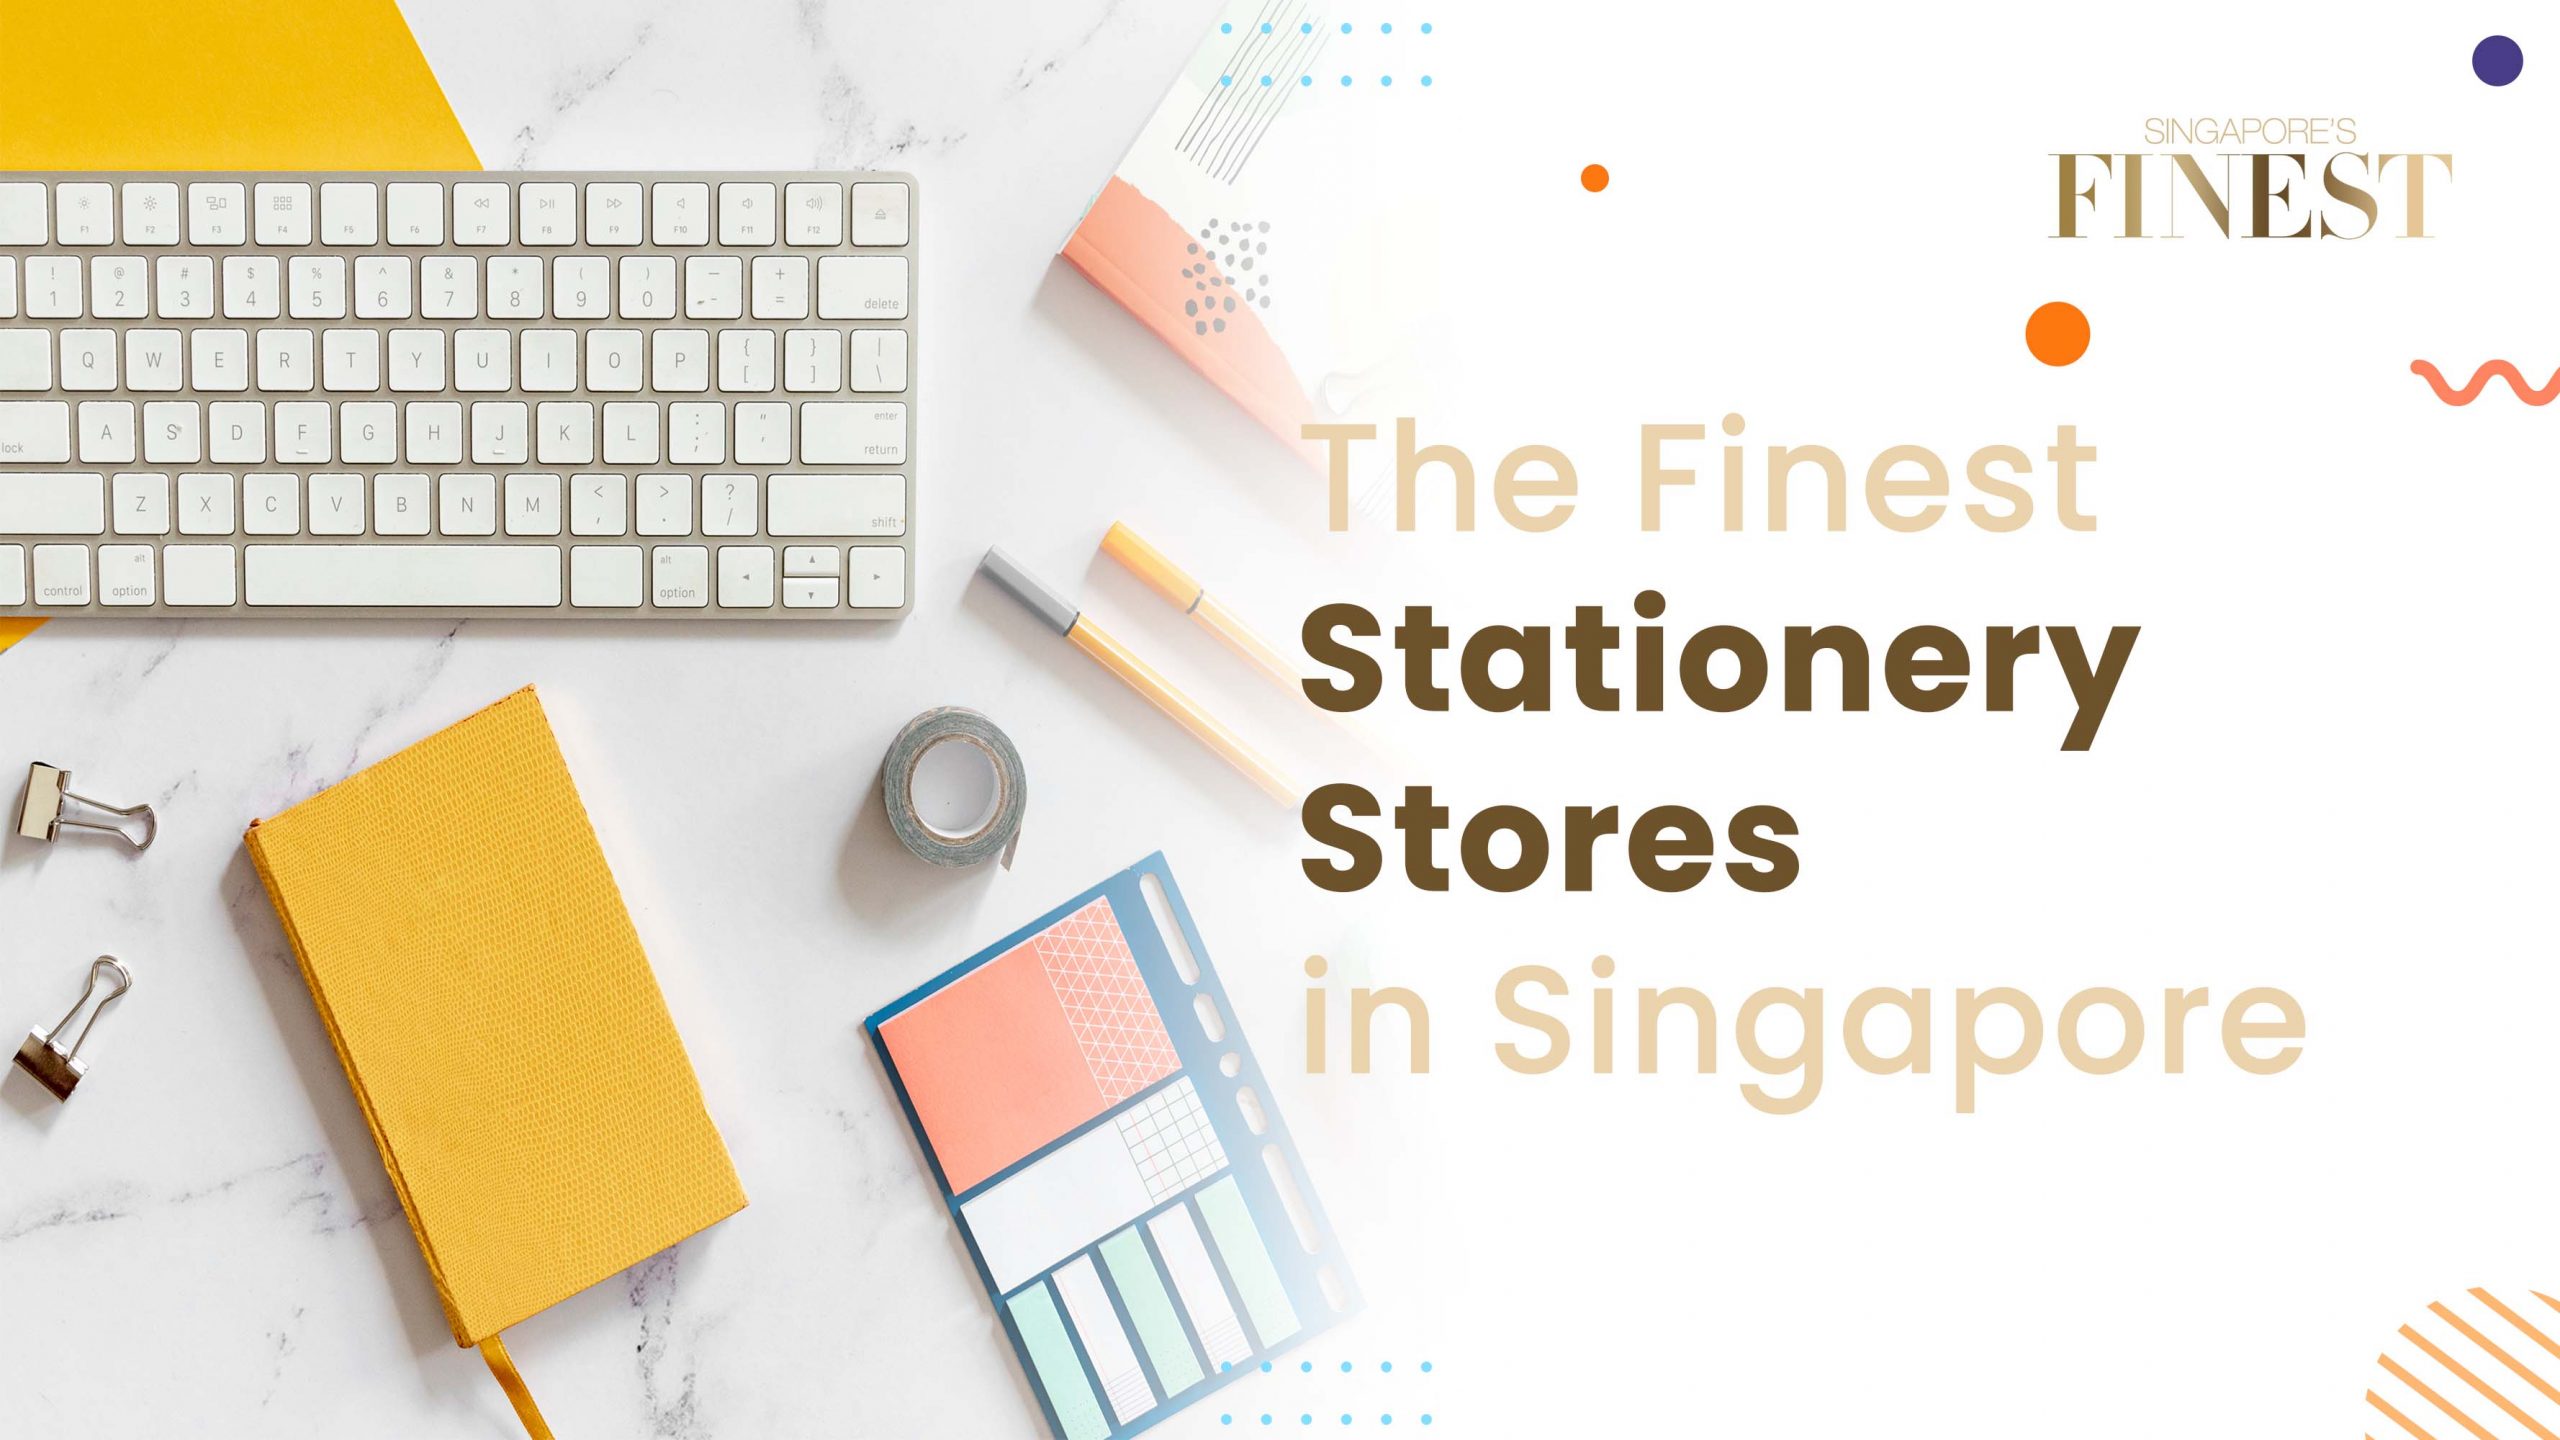 Finest Stationery Stores in Singapore